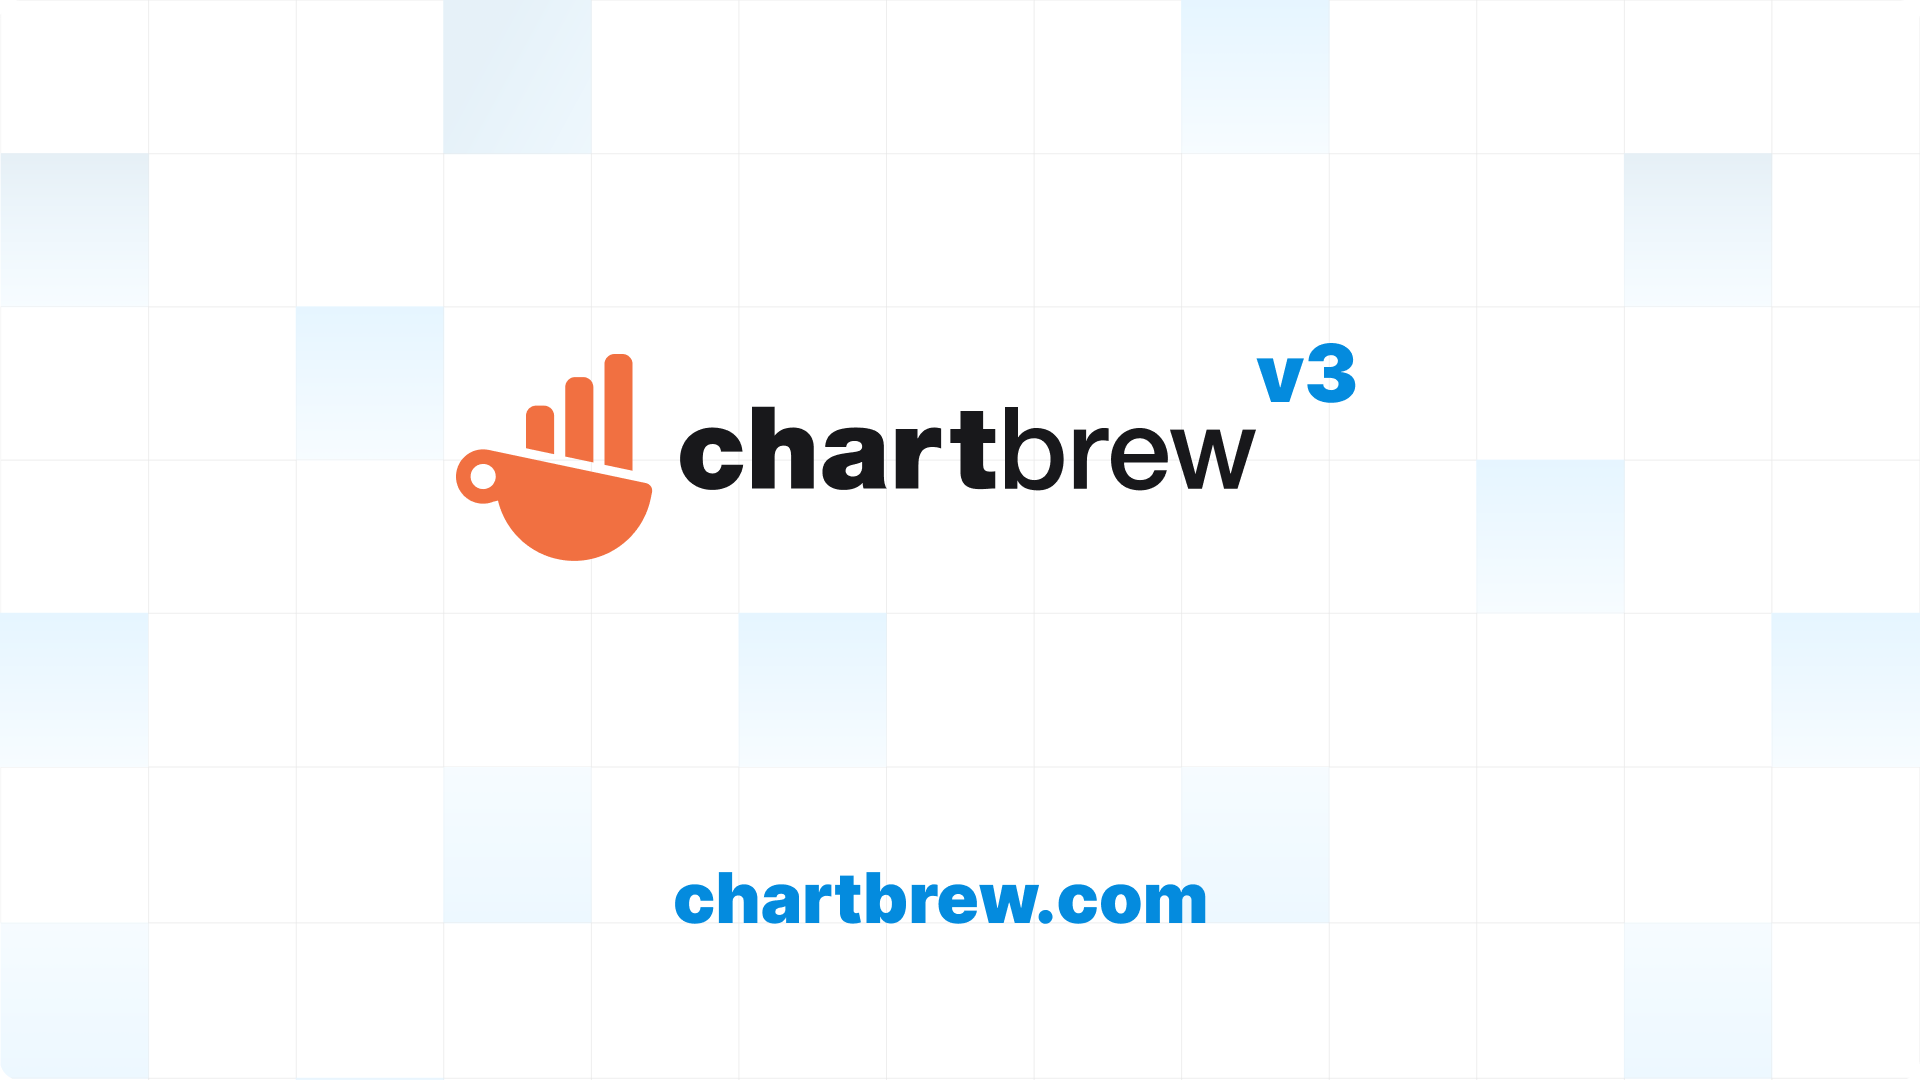 Chartbrew v3 - what's new